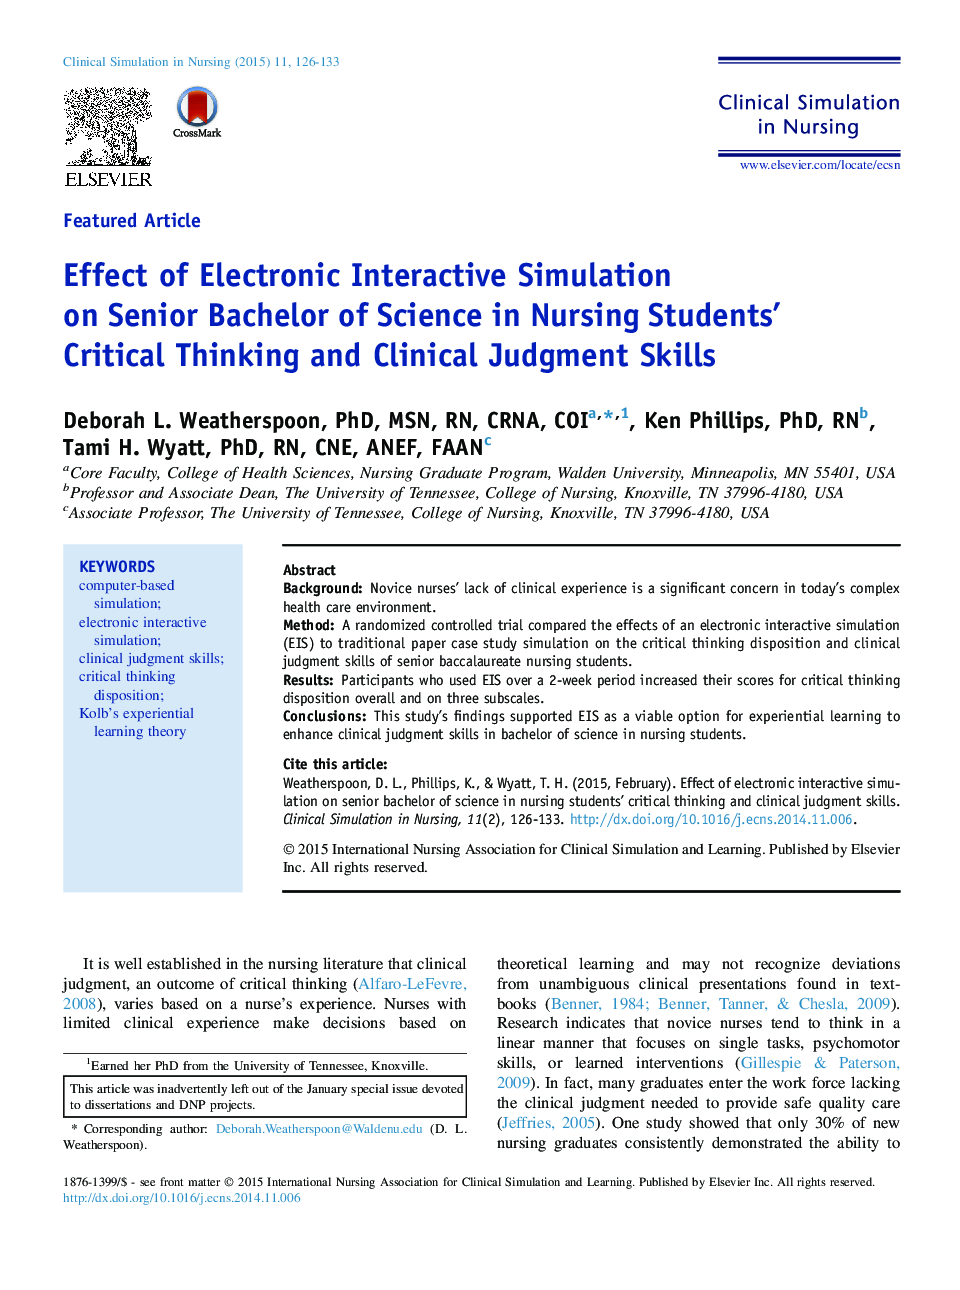 Effect of Electronic Interactive Simulation on Senior Bachelor of Science in Nursing Students' Critical Thinking and Clinical Judgment Skills 